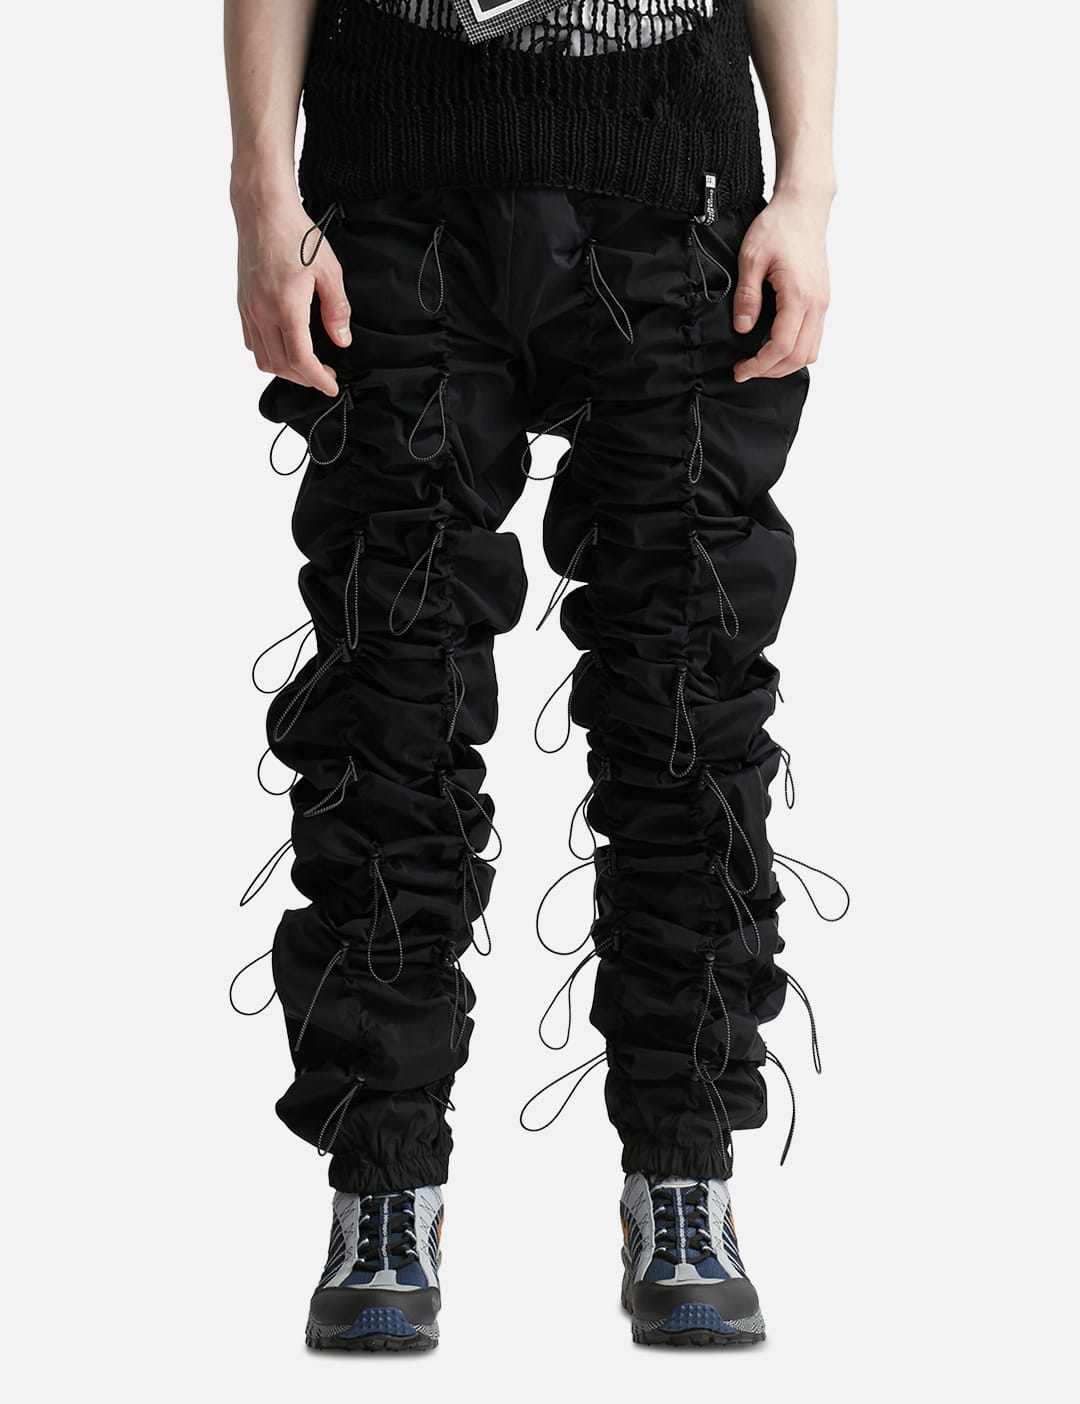 99%IS- - GOBCHANG PANTS | HBX - Globally Curated Fashion and